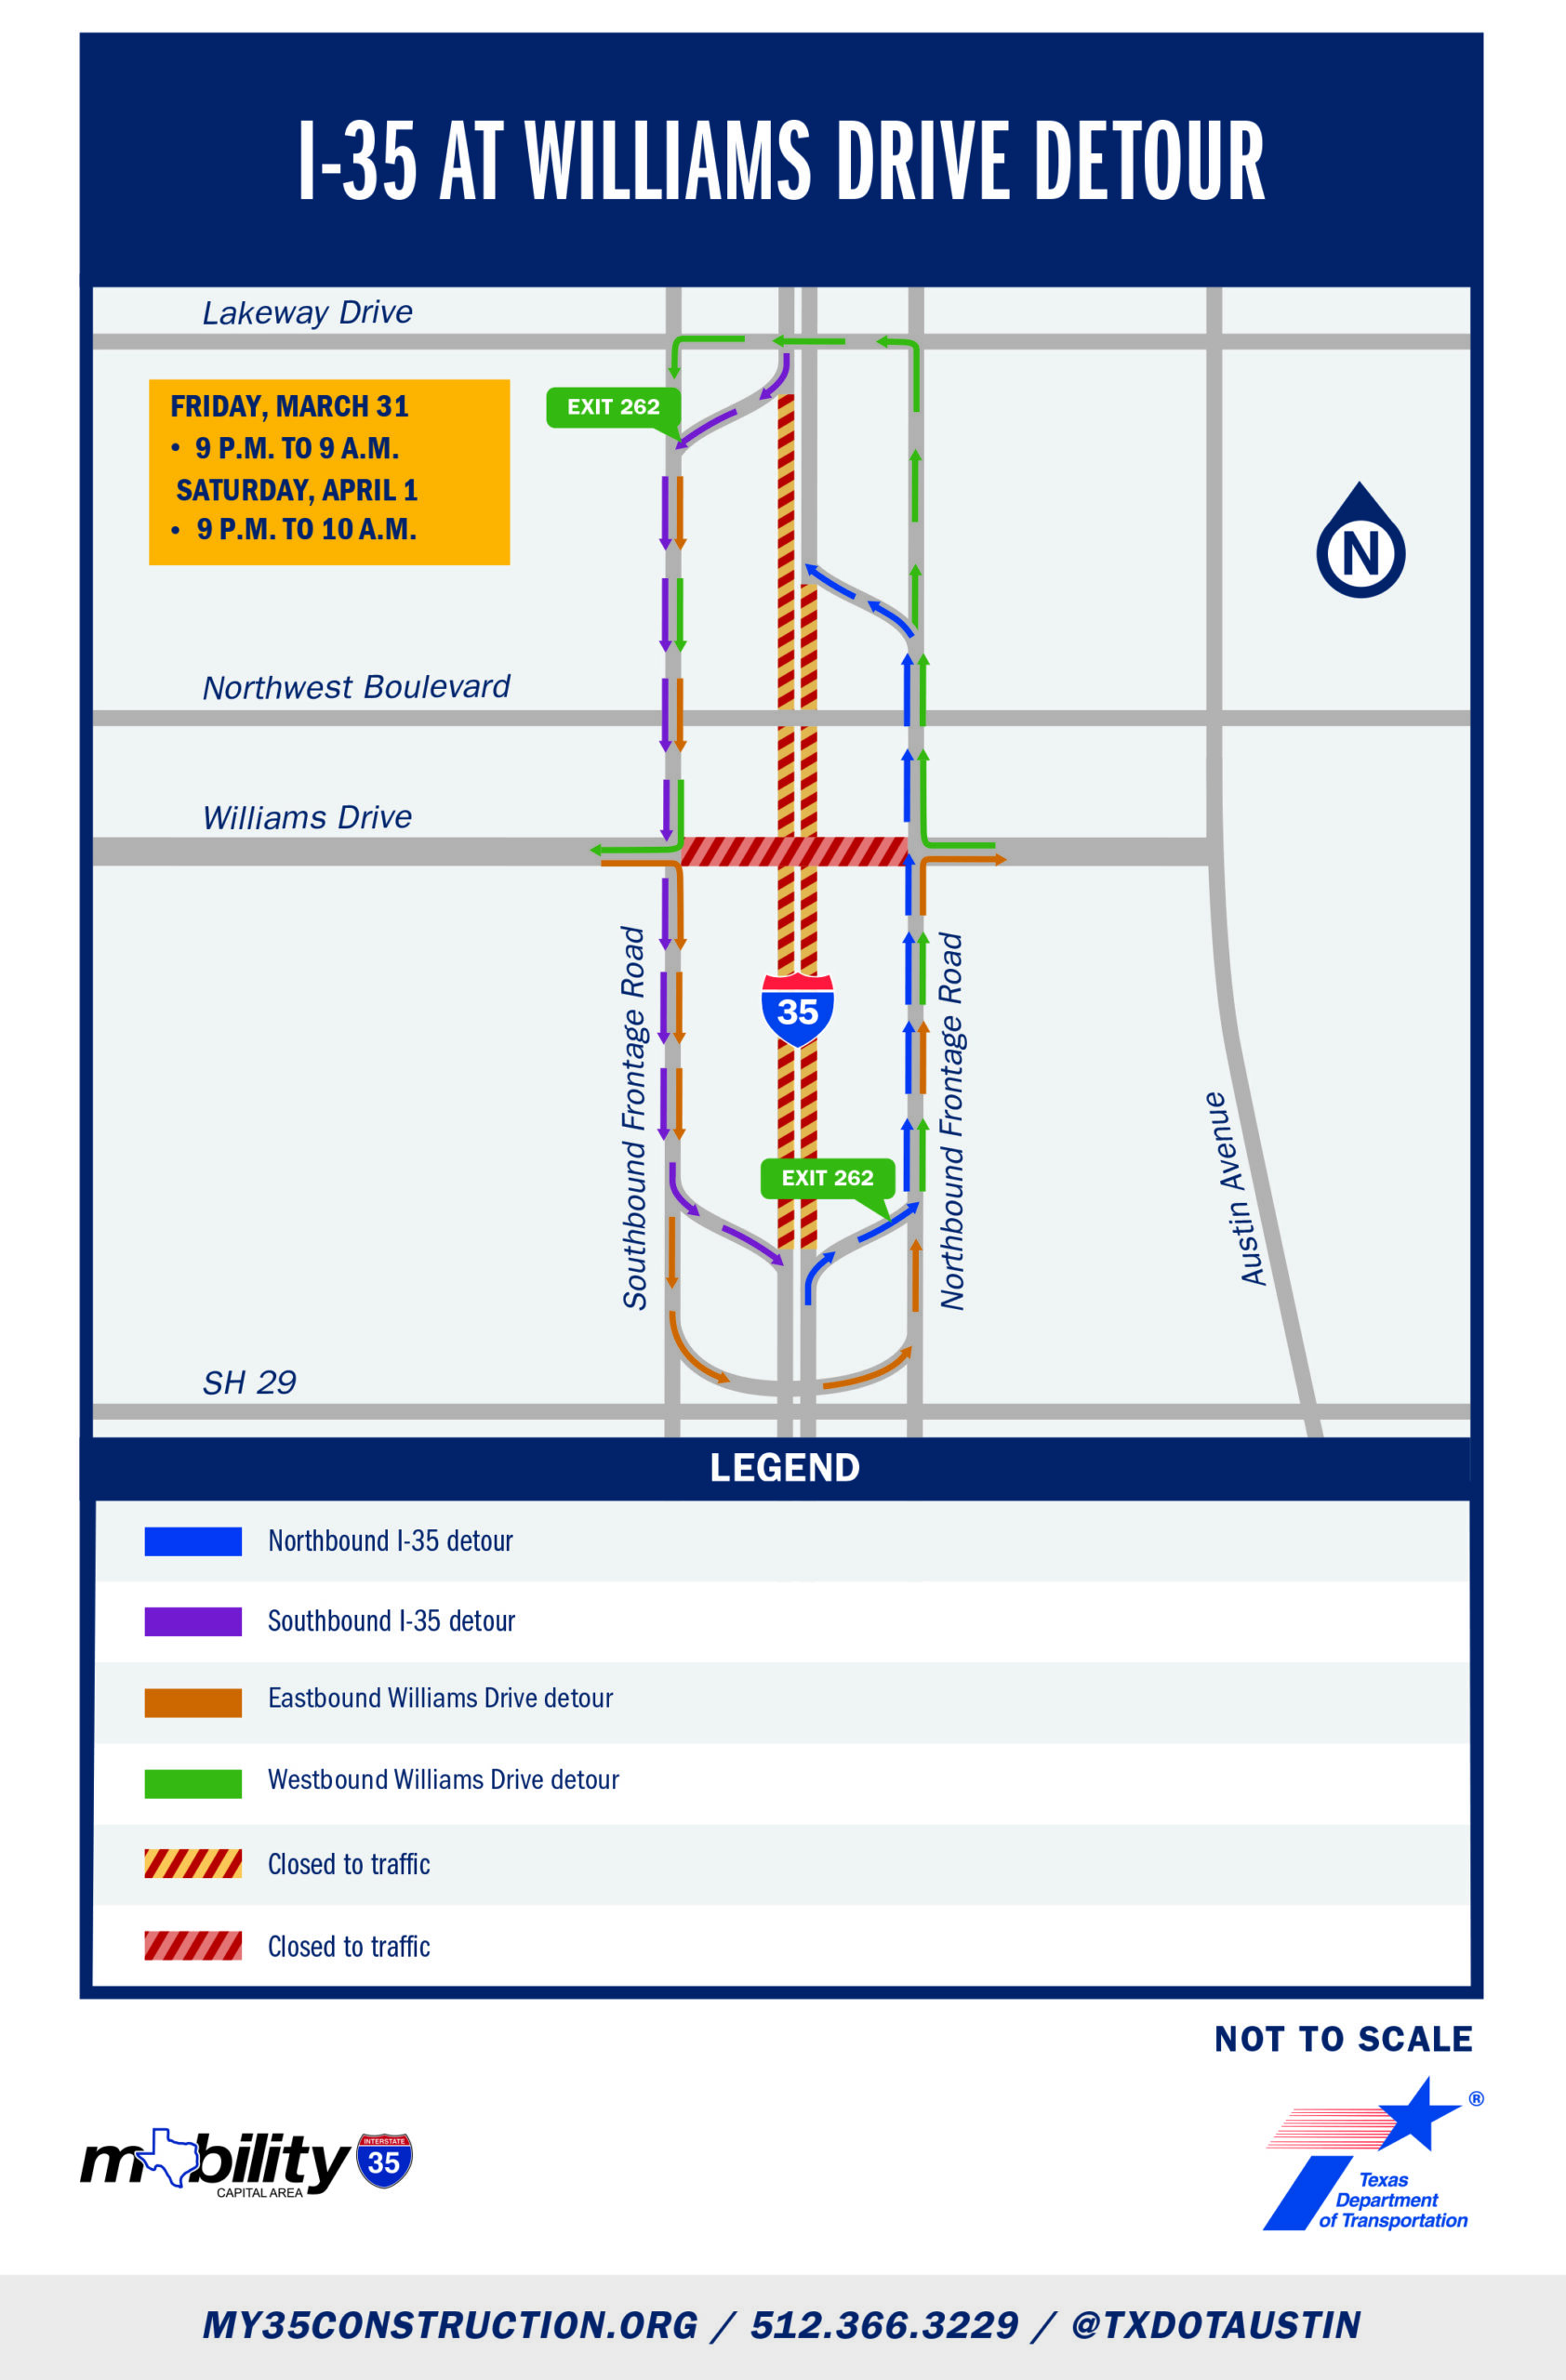 I-35 at Williams Drive detour map for I-35 mainlanes and for Williams Drive bridge. 